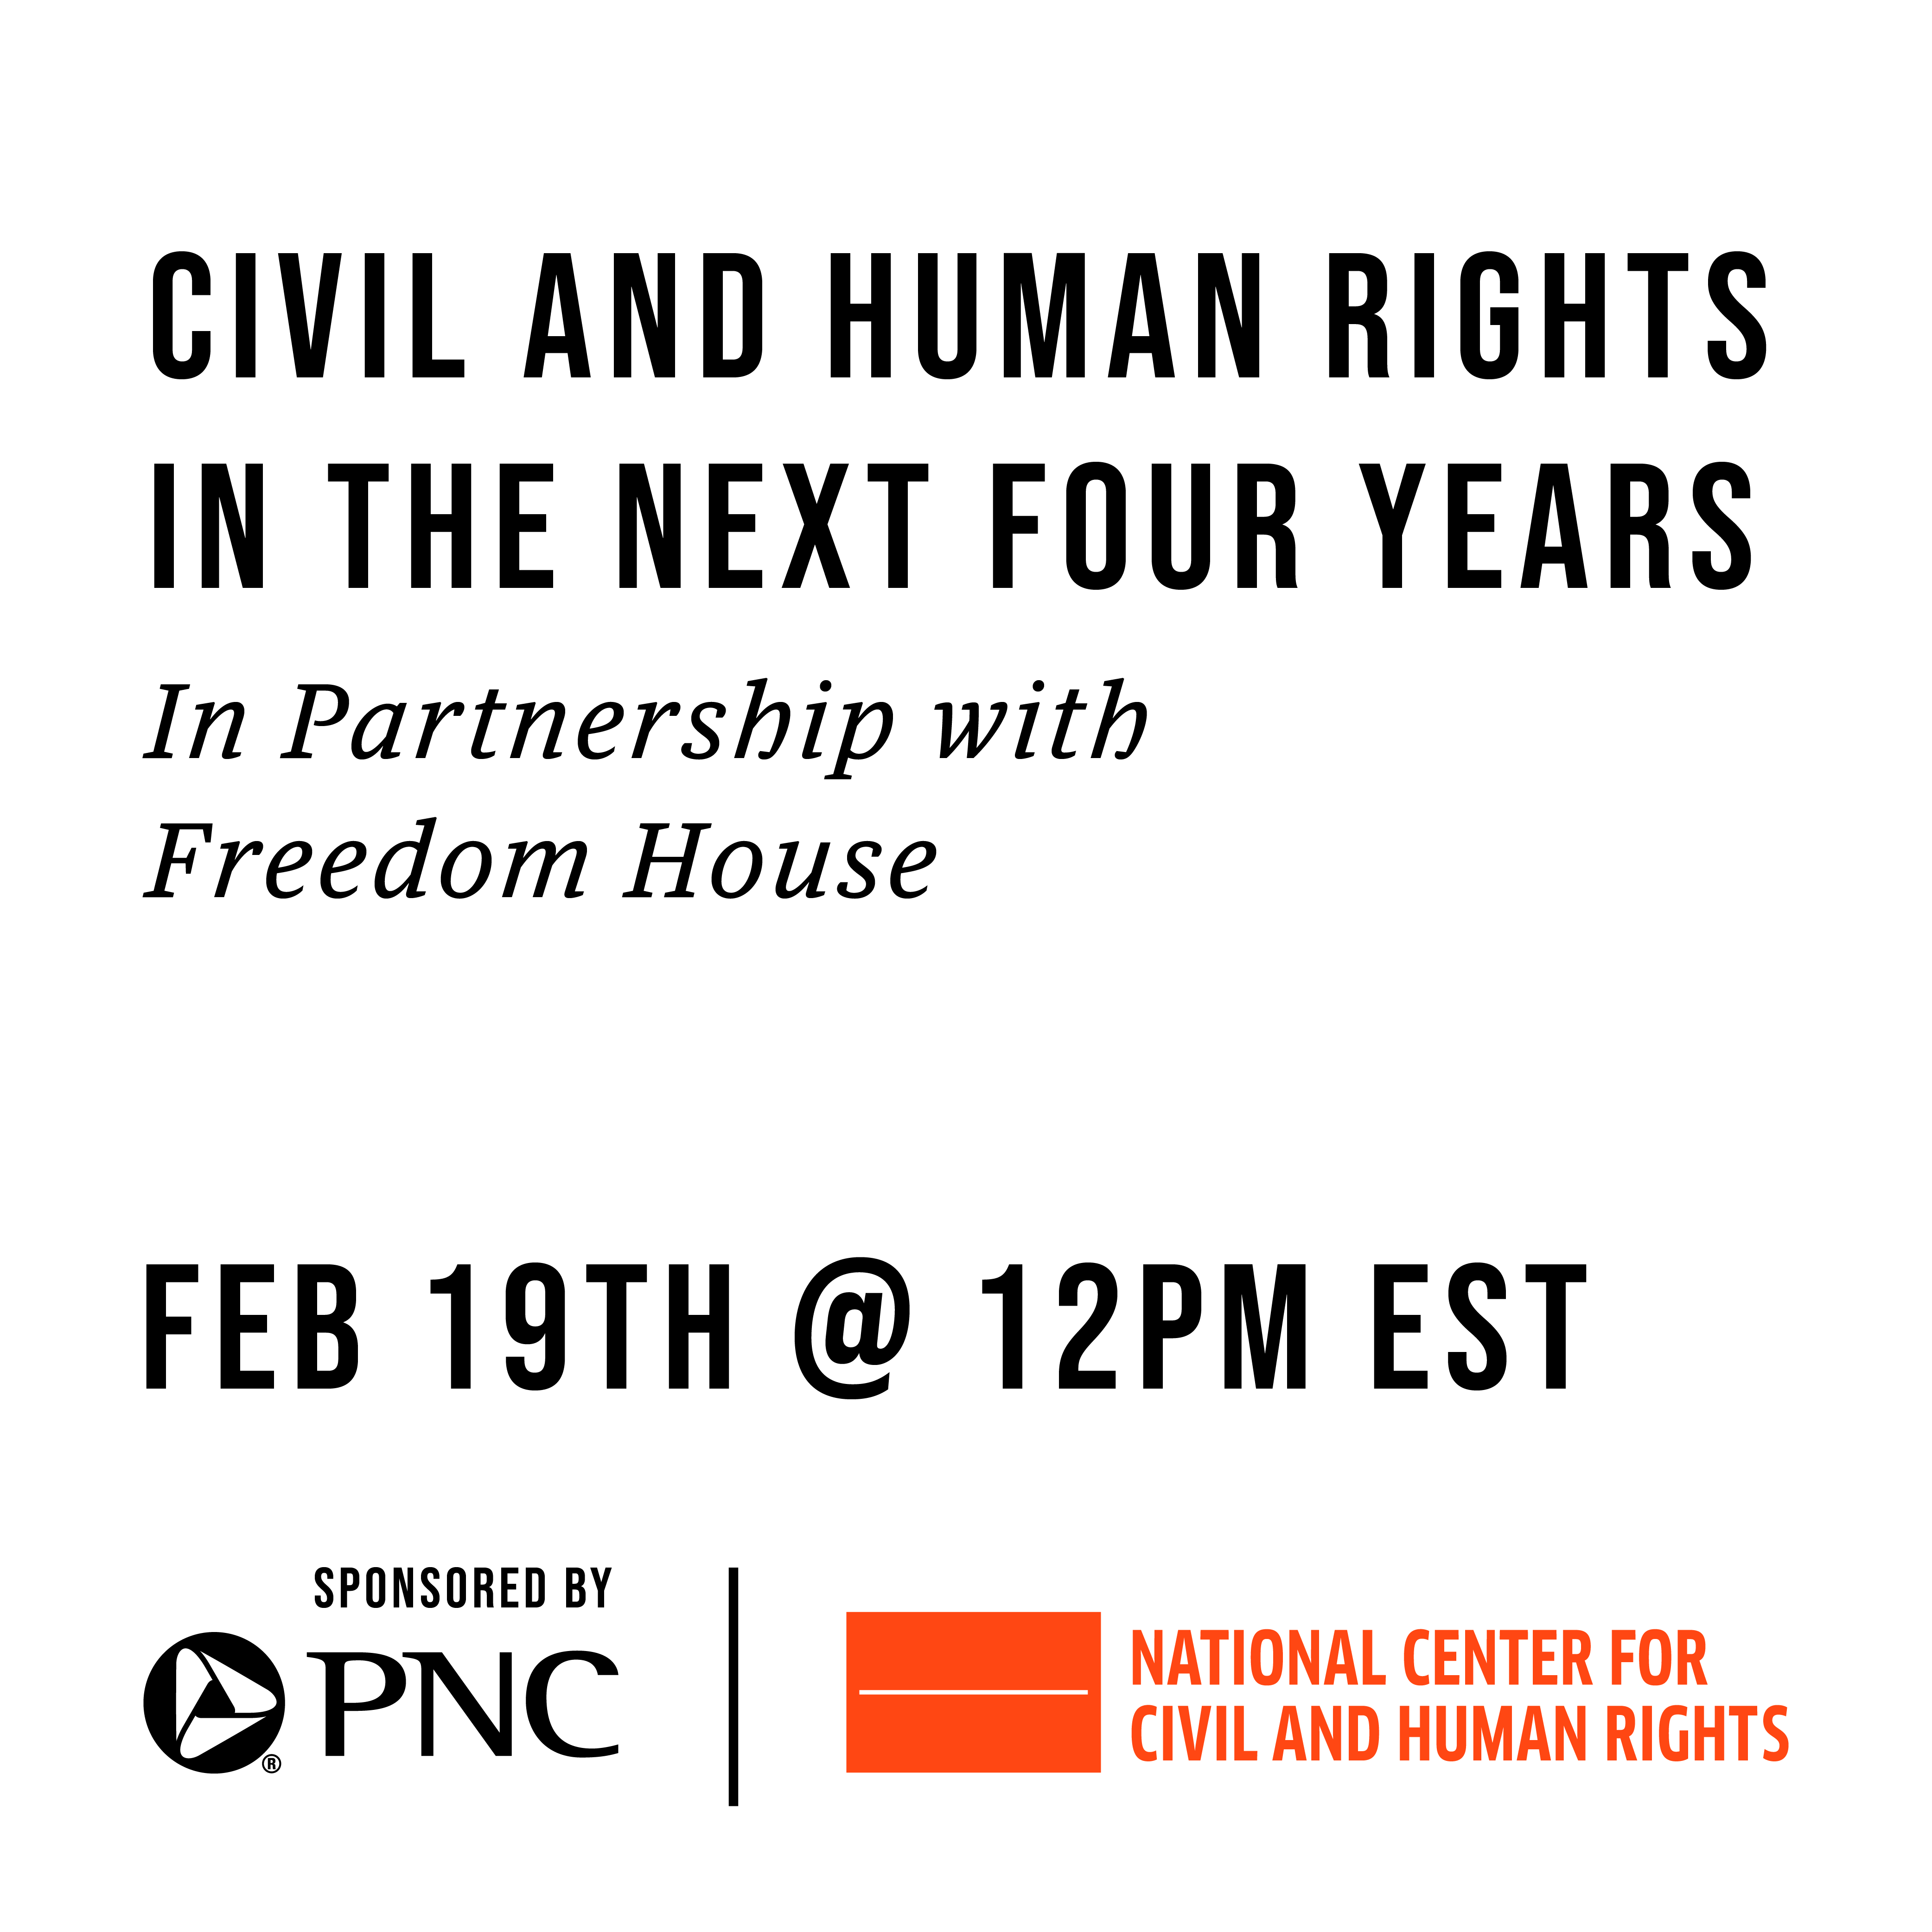 Civil and Human Rights in the Next Four Years